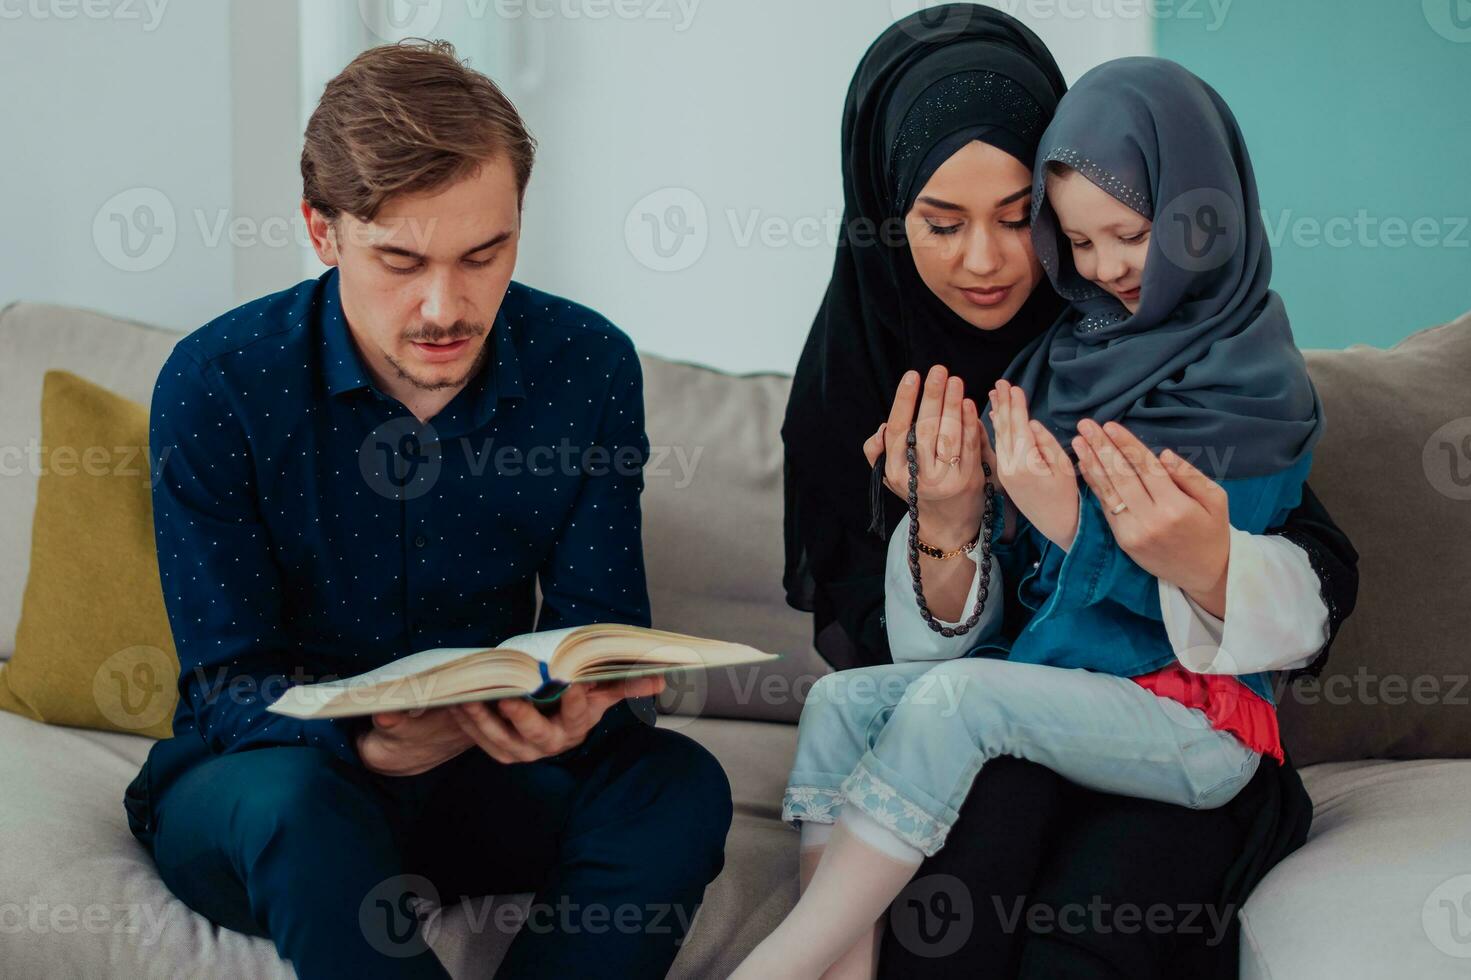 Happy Muslim family enjoying the holy month of Ramadan while praying and reading the Quran together in a modern home photo